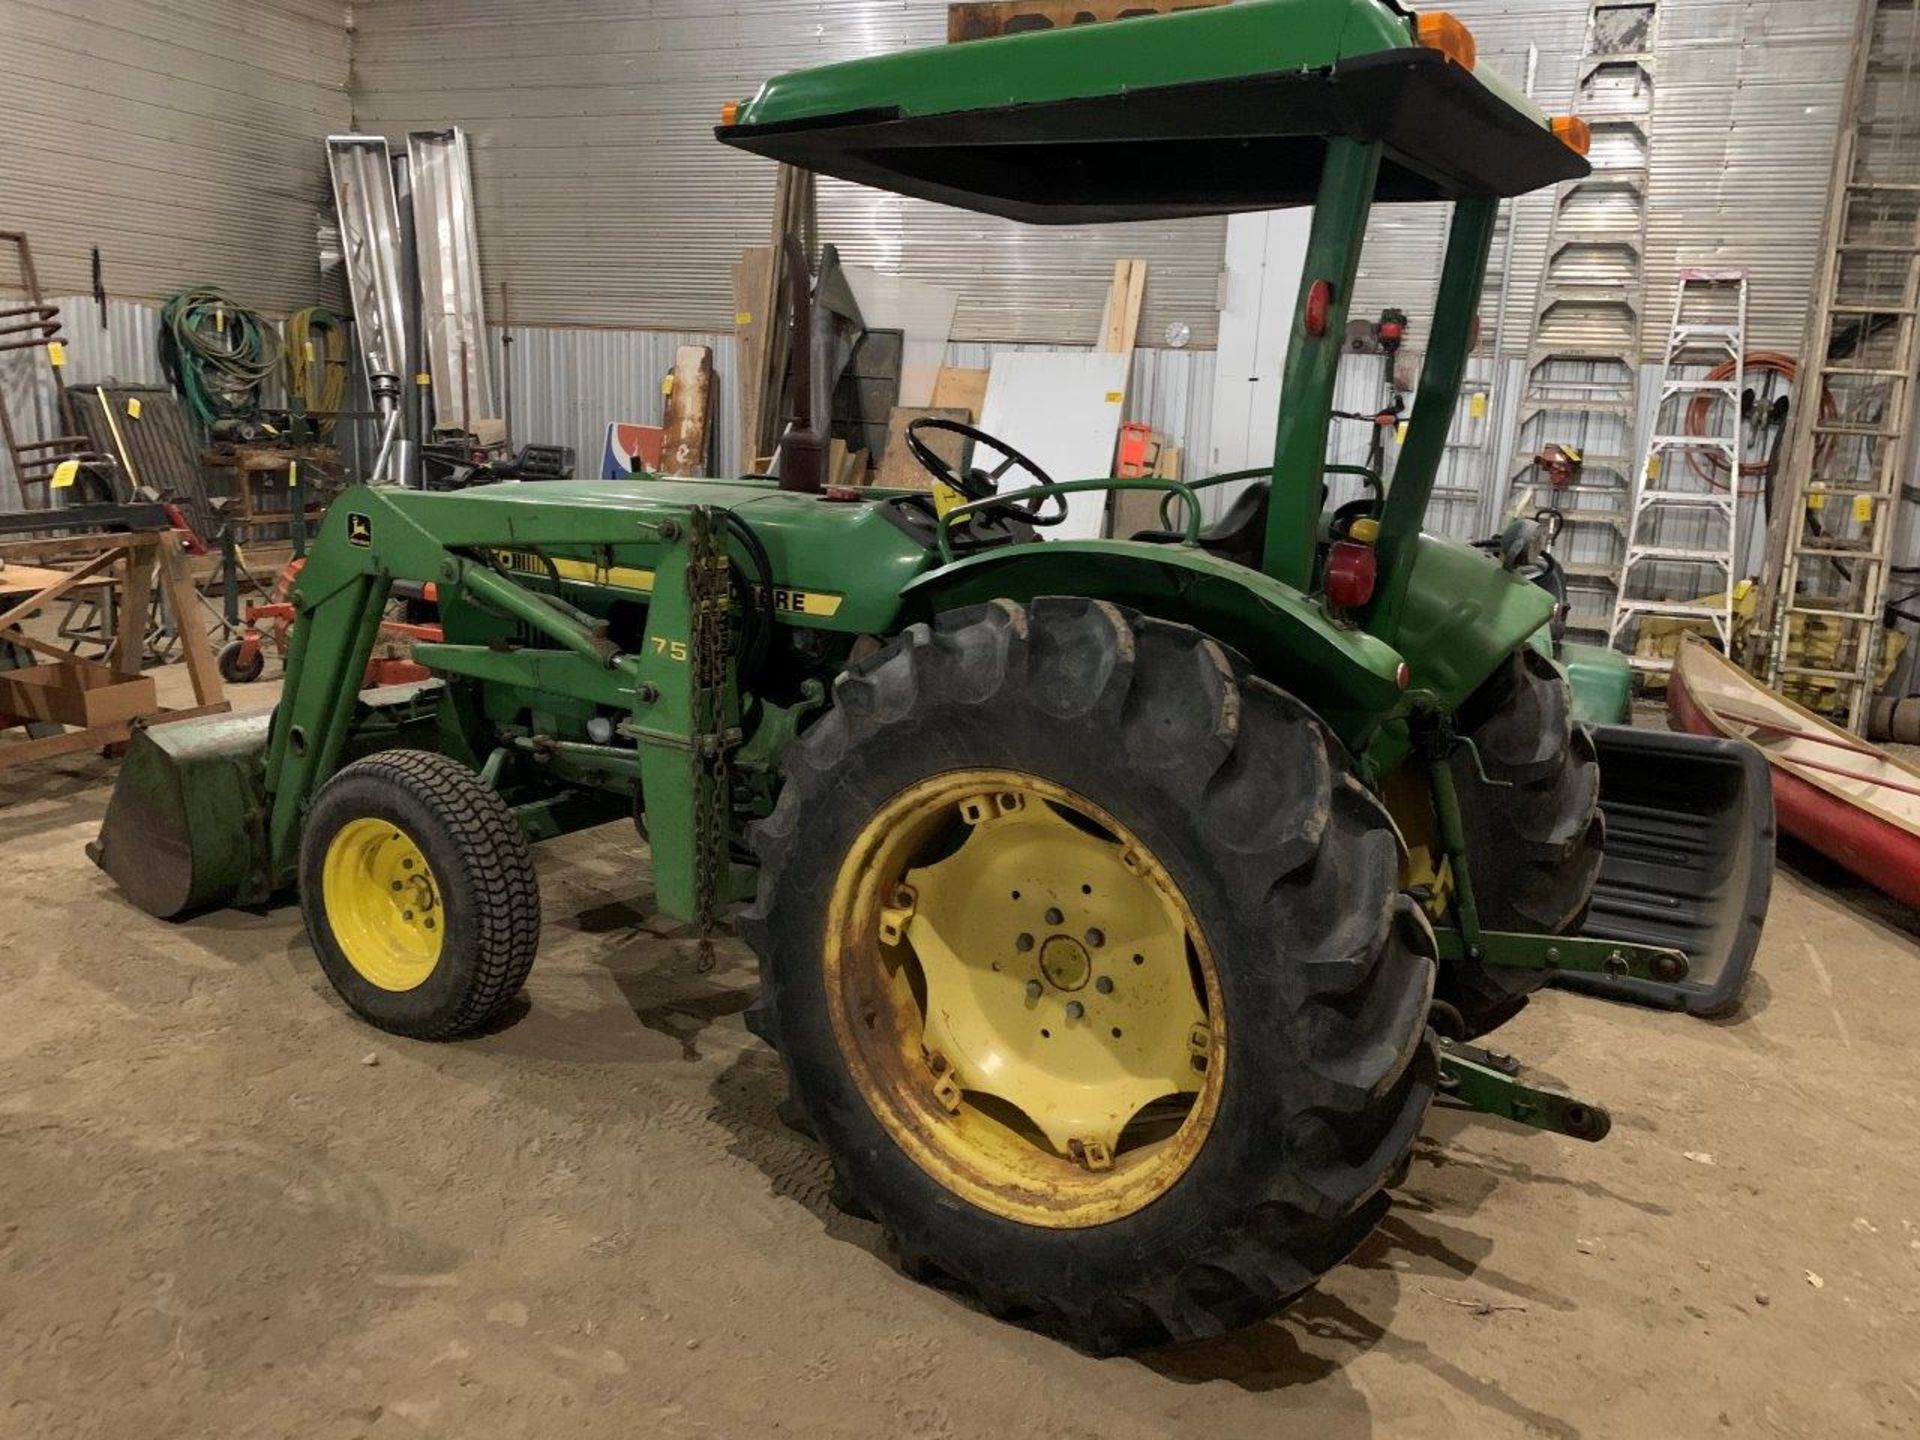 JOHN DEERE 950 TRACTOR, 2WD, PTO, 3-PT, HITCH, FEL, 1909.4 HRS SHOWING, S/N 0950S012992CH, TIRE